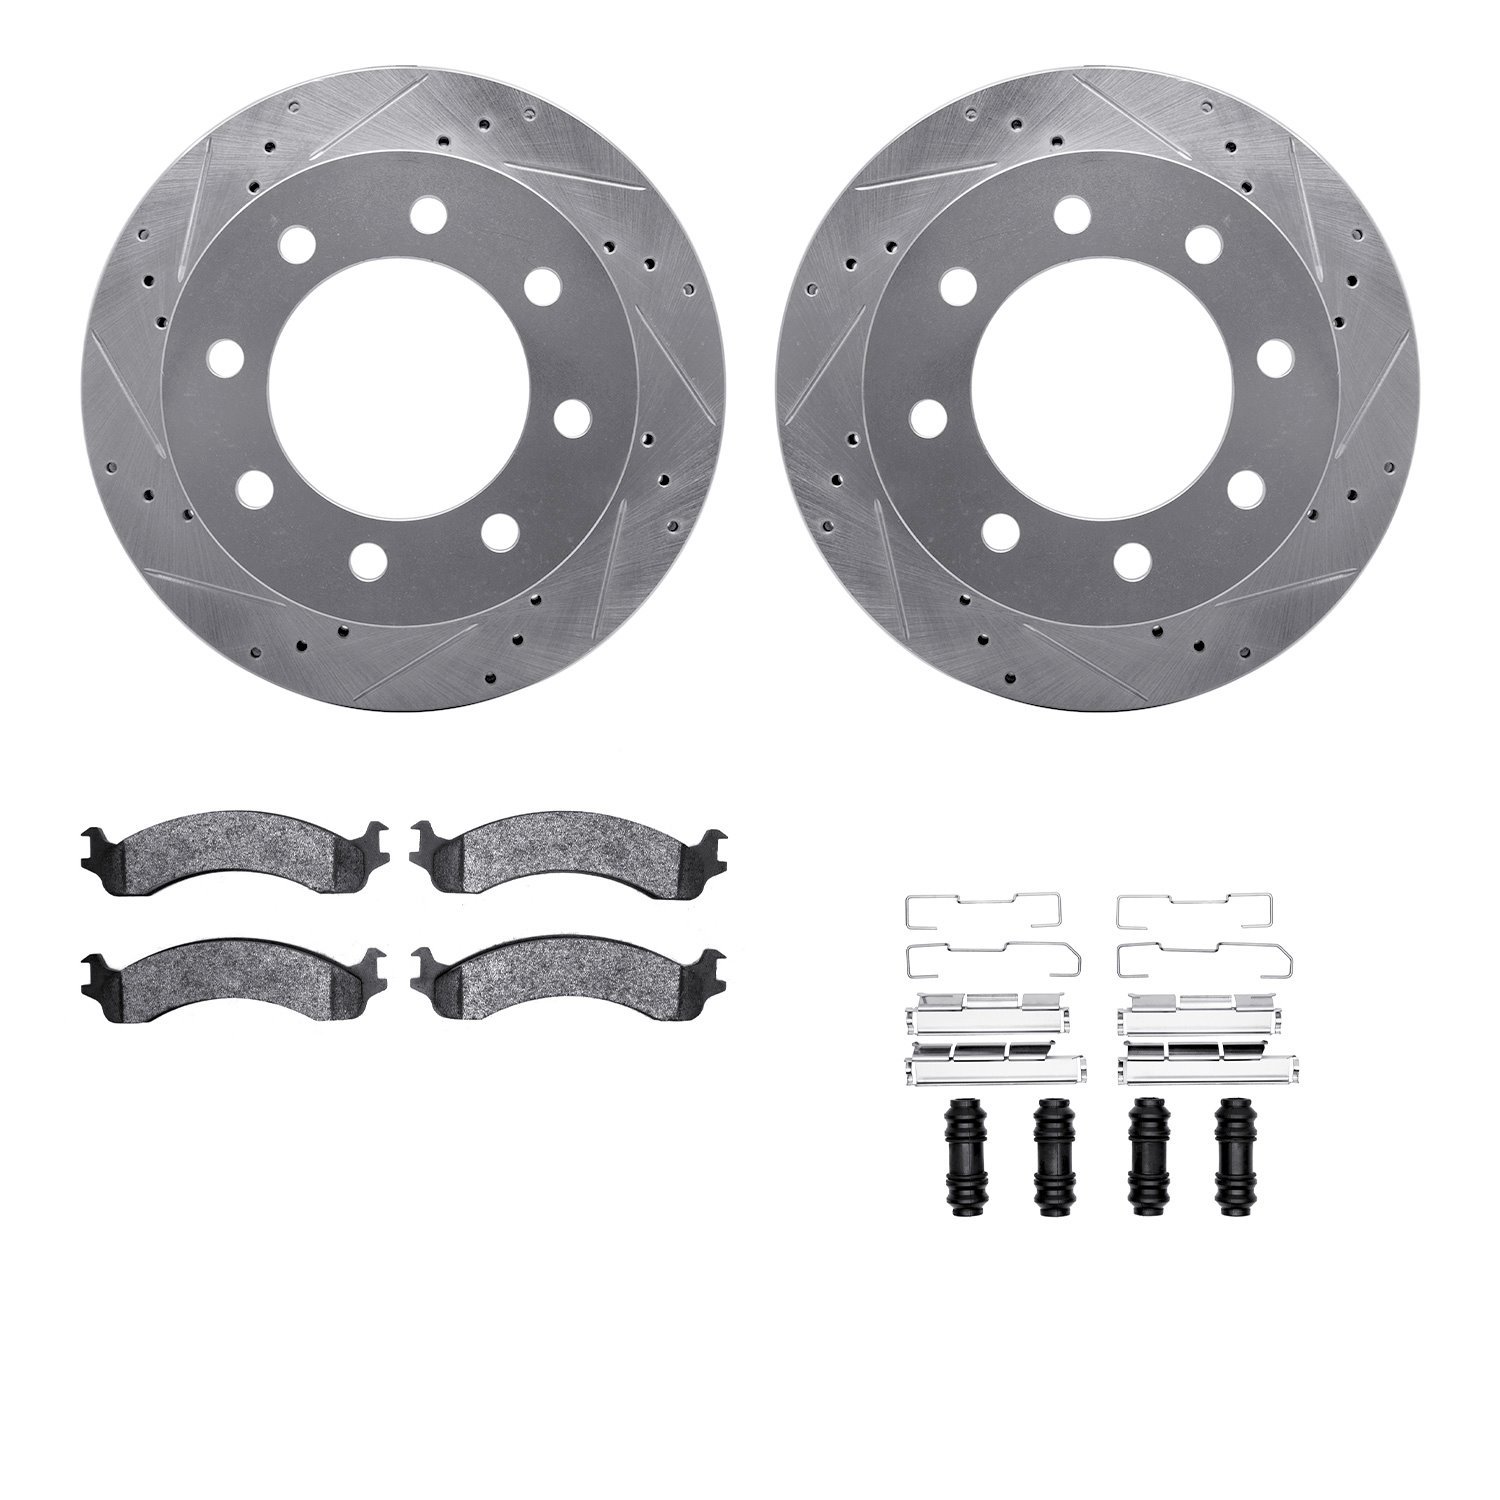 7412-40006 Drilled/Slotted Brake Rotors with Ultimate-Duty Brake Pads Kit & Hardware [Silver], 2000-2002 Mopar, Position: Front